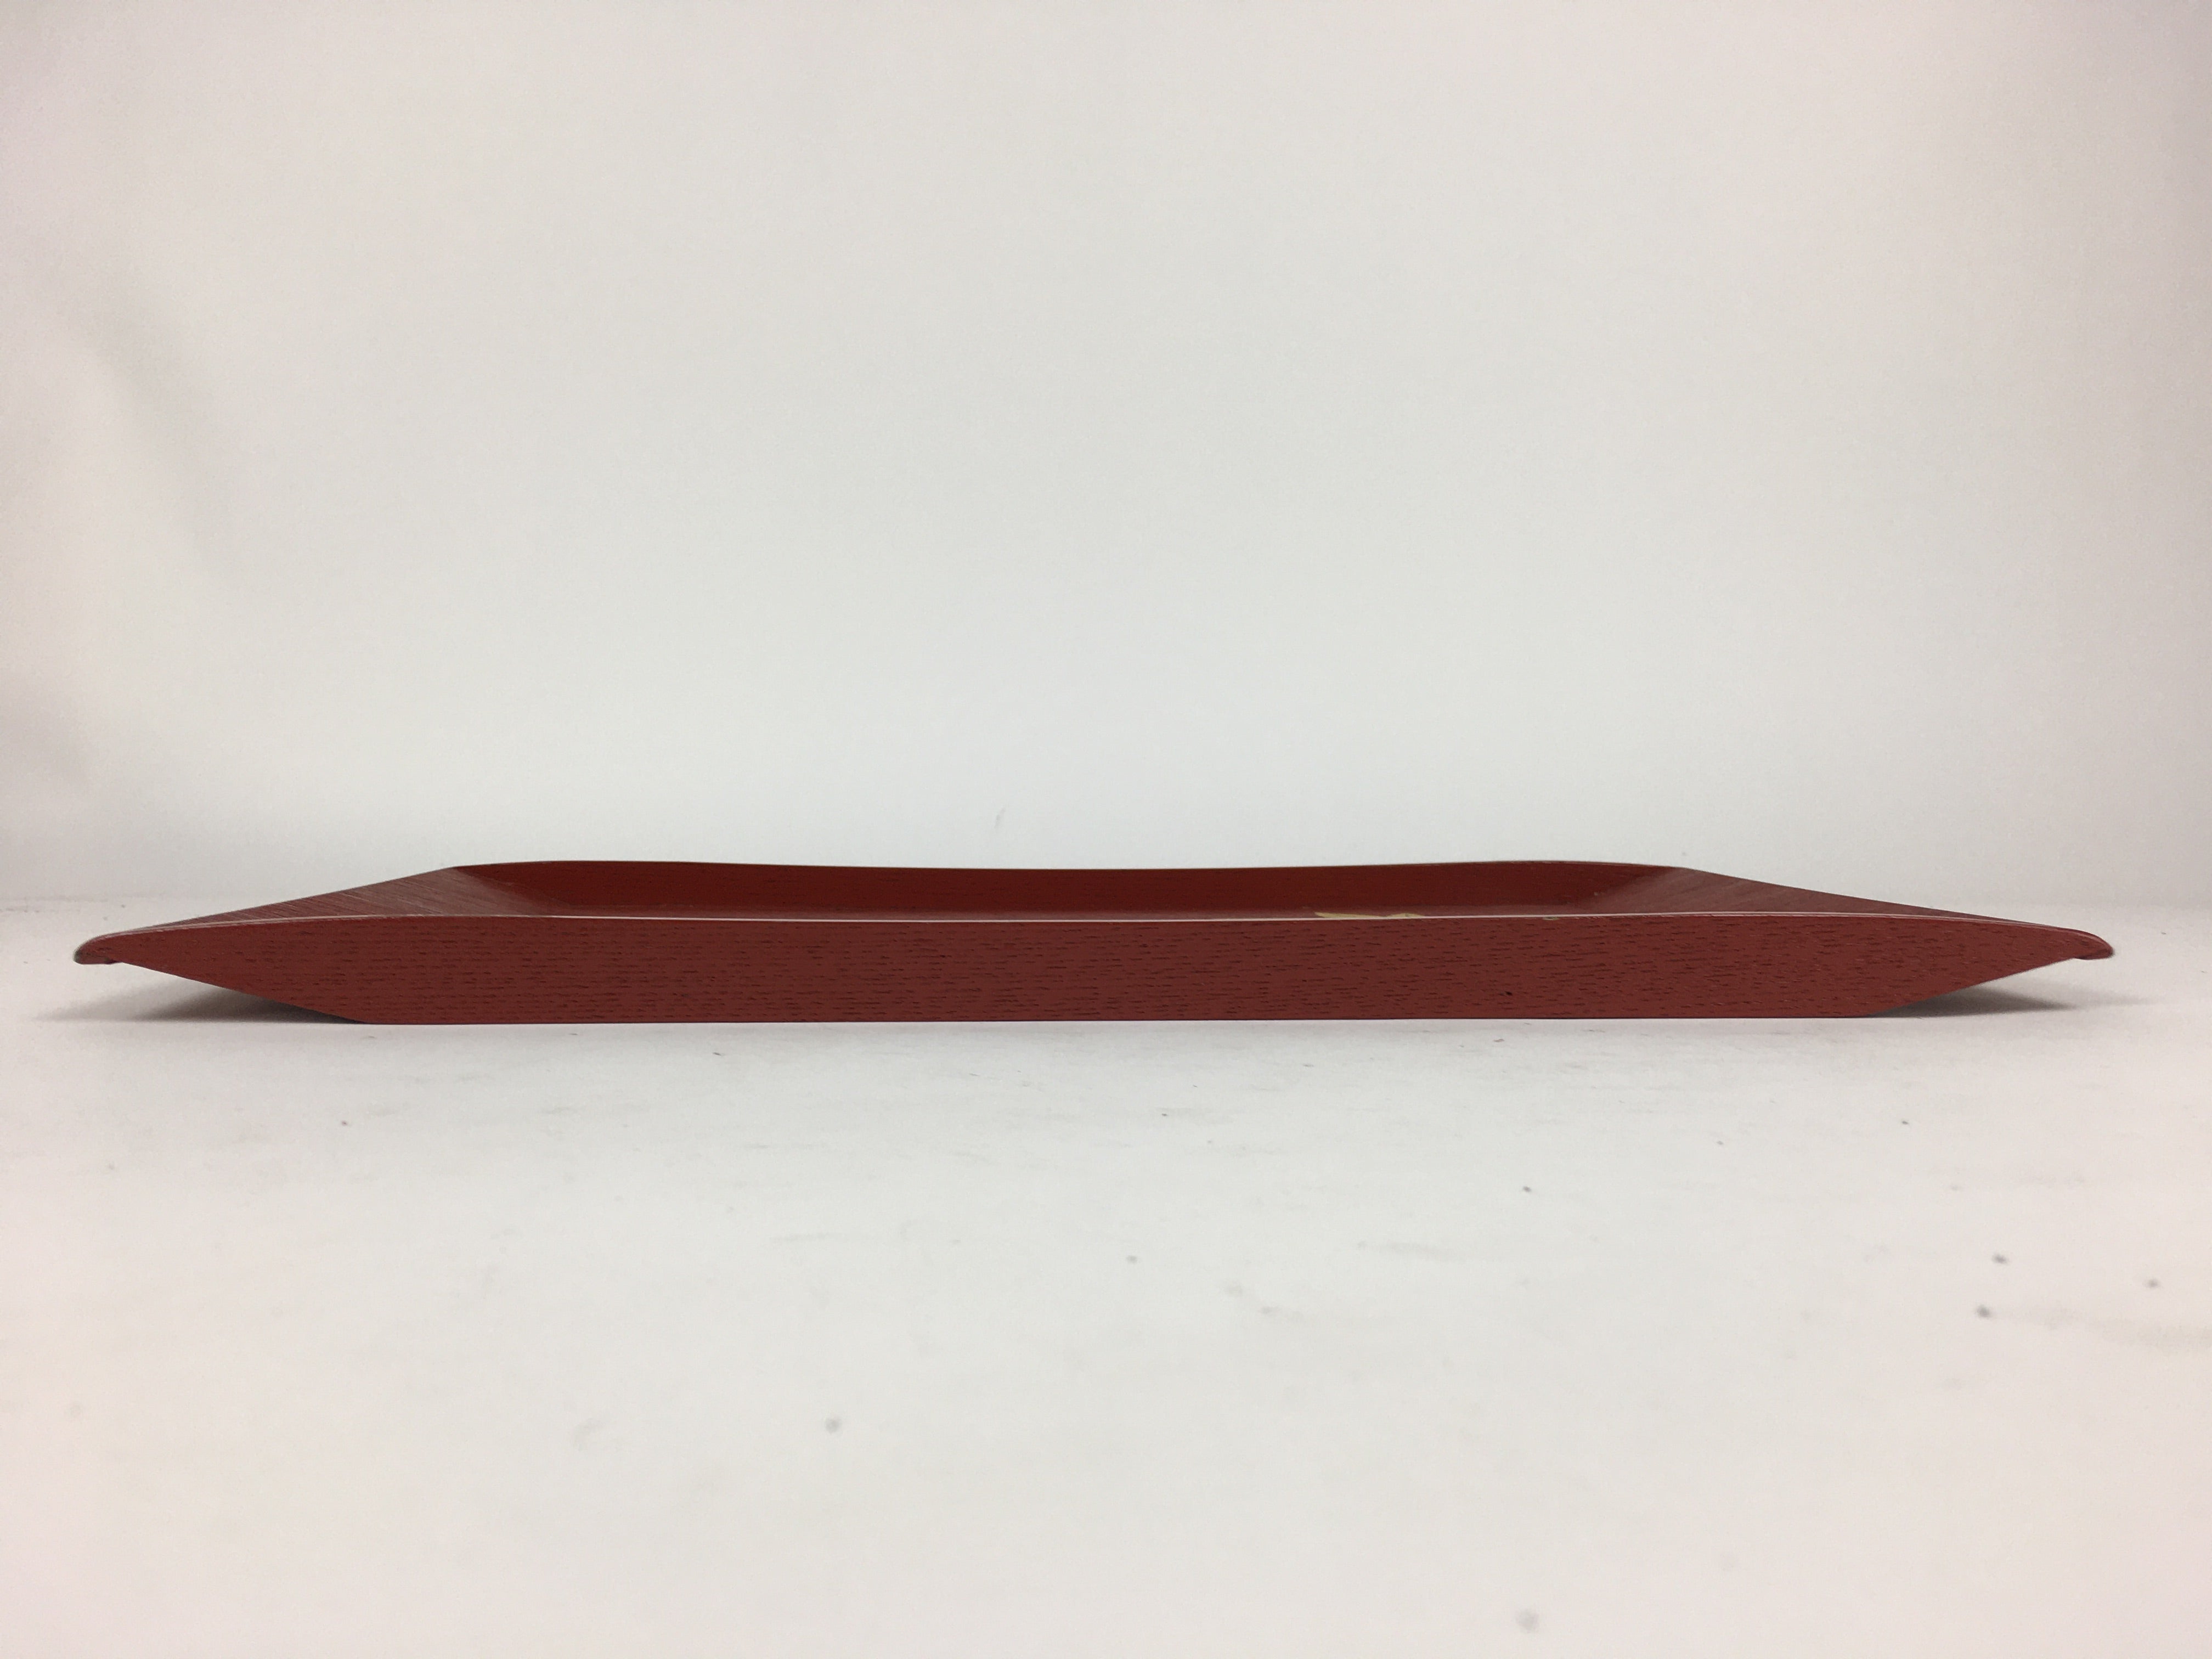 Japanese Wooden Lacquered Tray Obon Vtg Nurimono Red Square Shape UR641